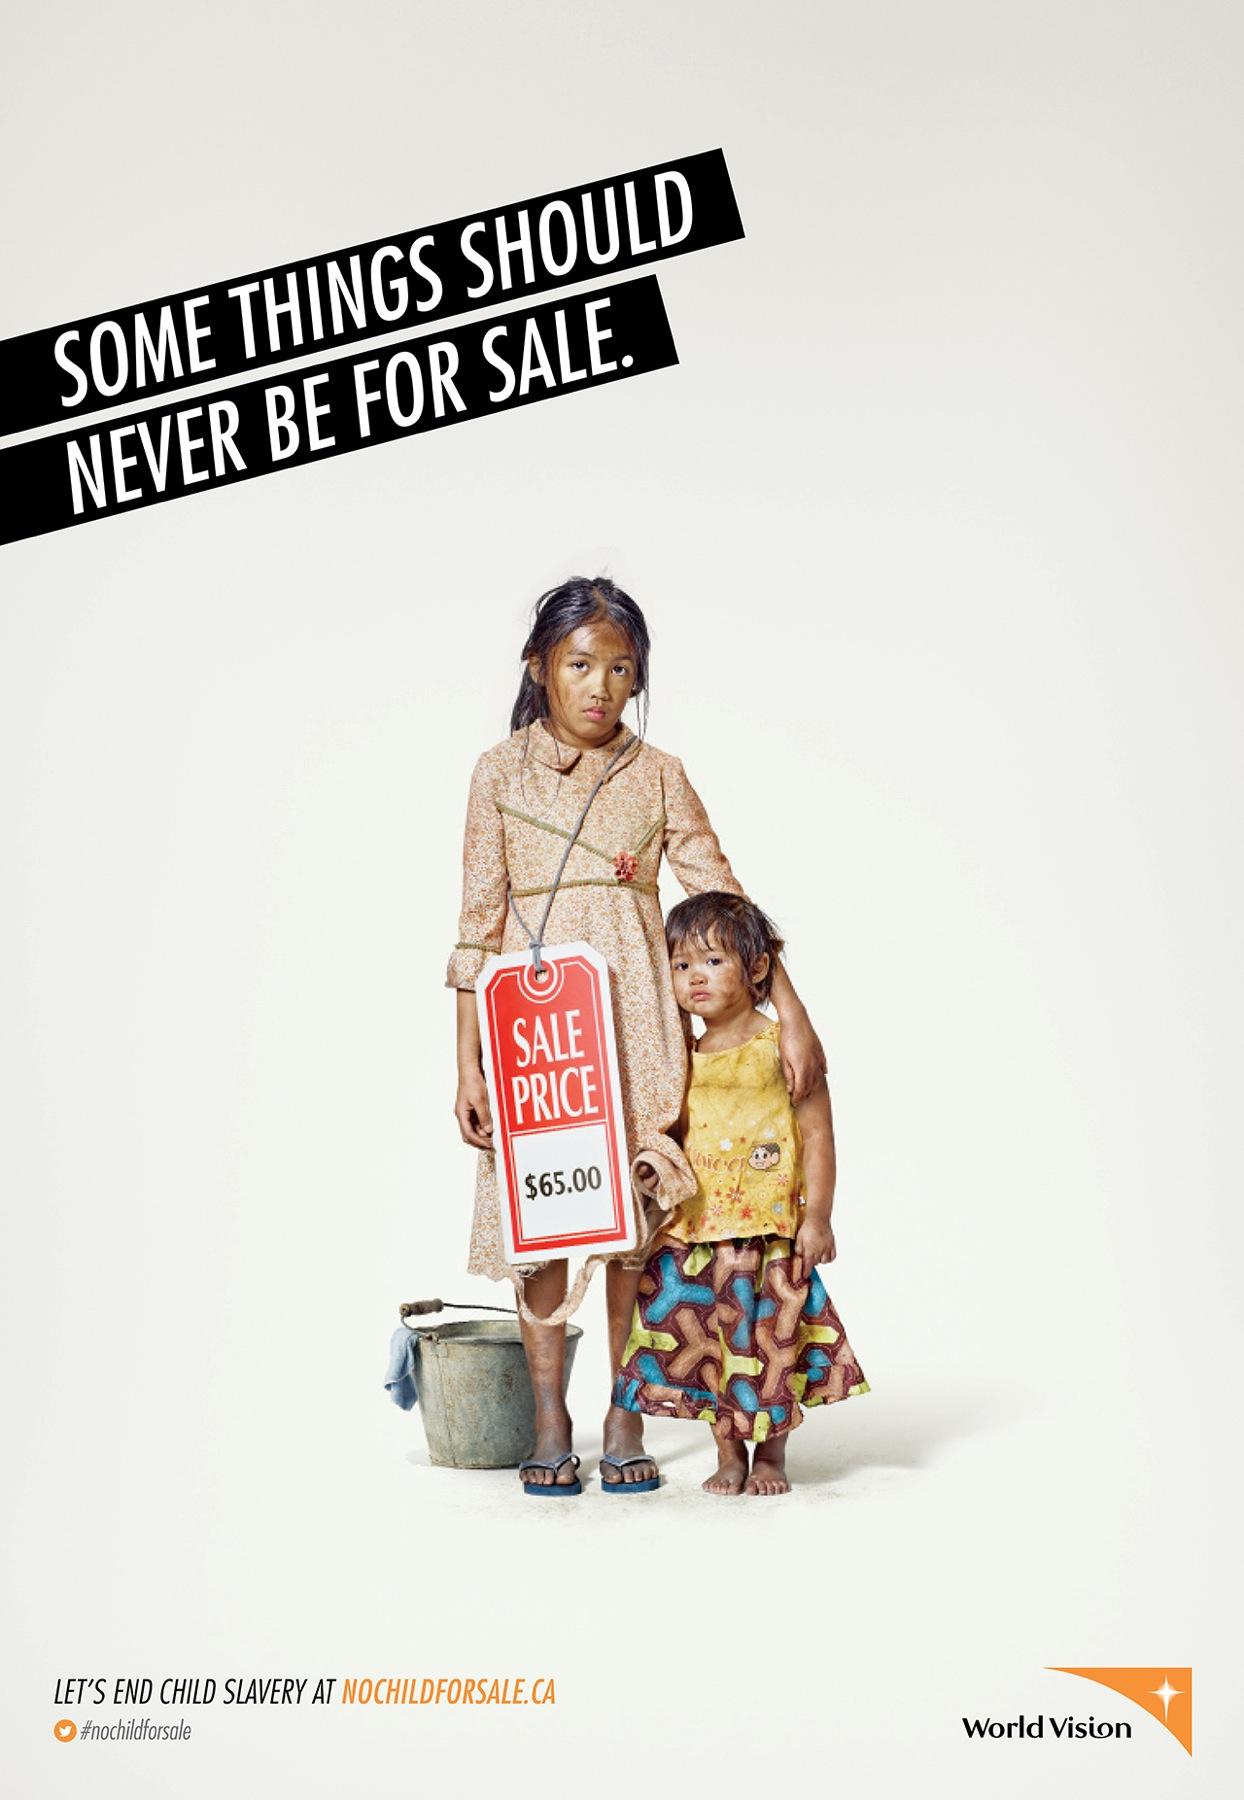 This ad is about the unethical practices of human slavery related to trafficking, in particular child trafficking. It depicts two young girls, one about 6 years old and one around 3 years old. Both are dressed in dresses with a dirty face, one with sandals and the other without. And over the 6 year old girl is a big "sale price" tag of $65